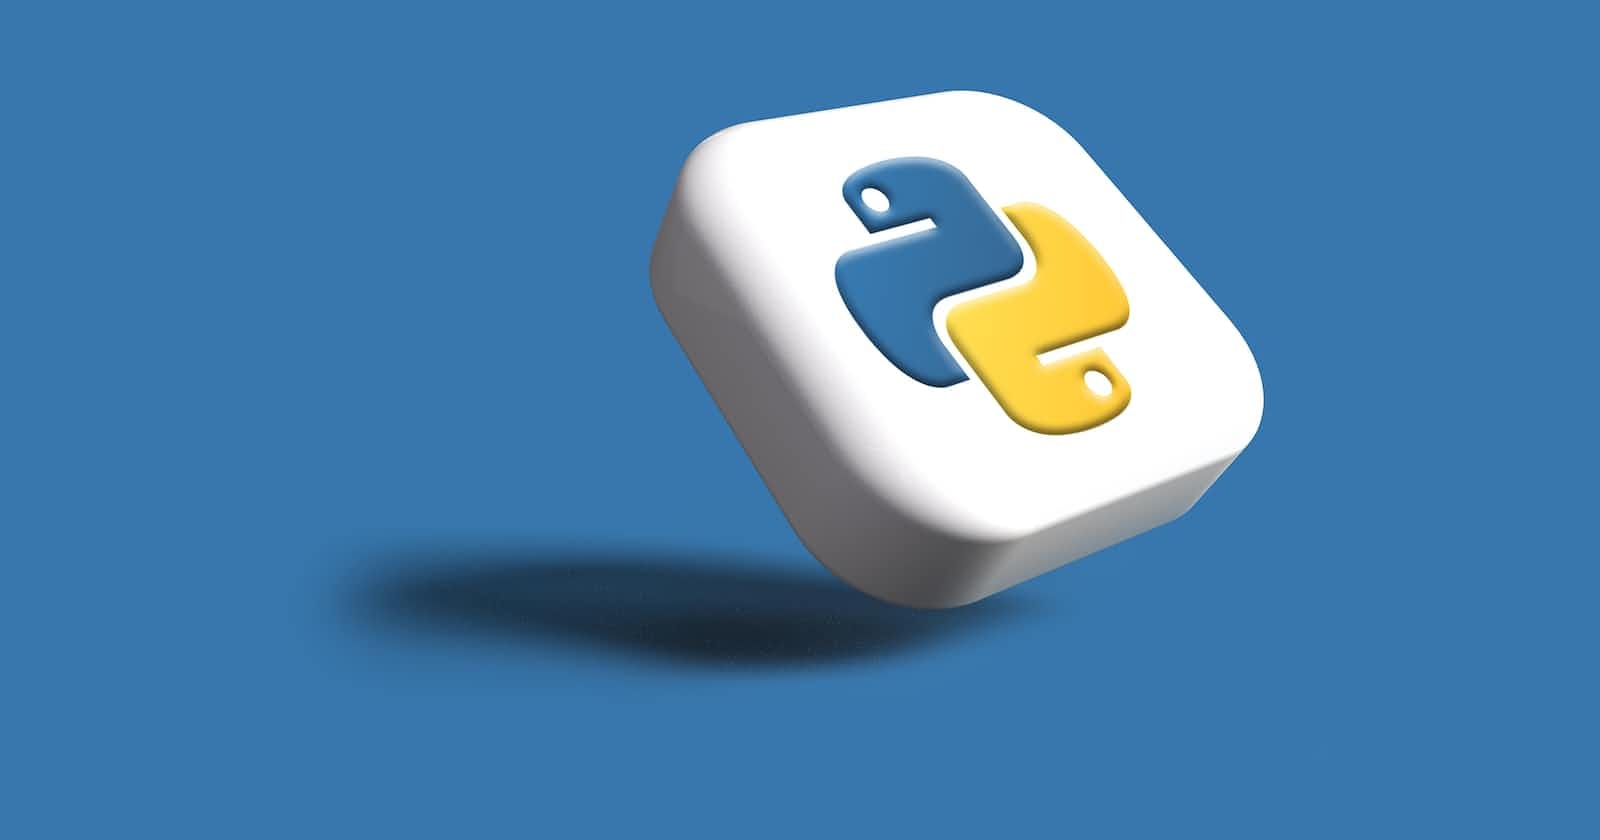 Using Python's pathlib to Work with JSON Files: Why and How?